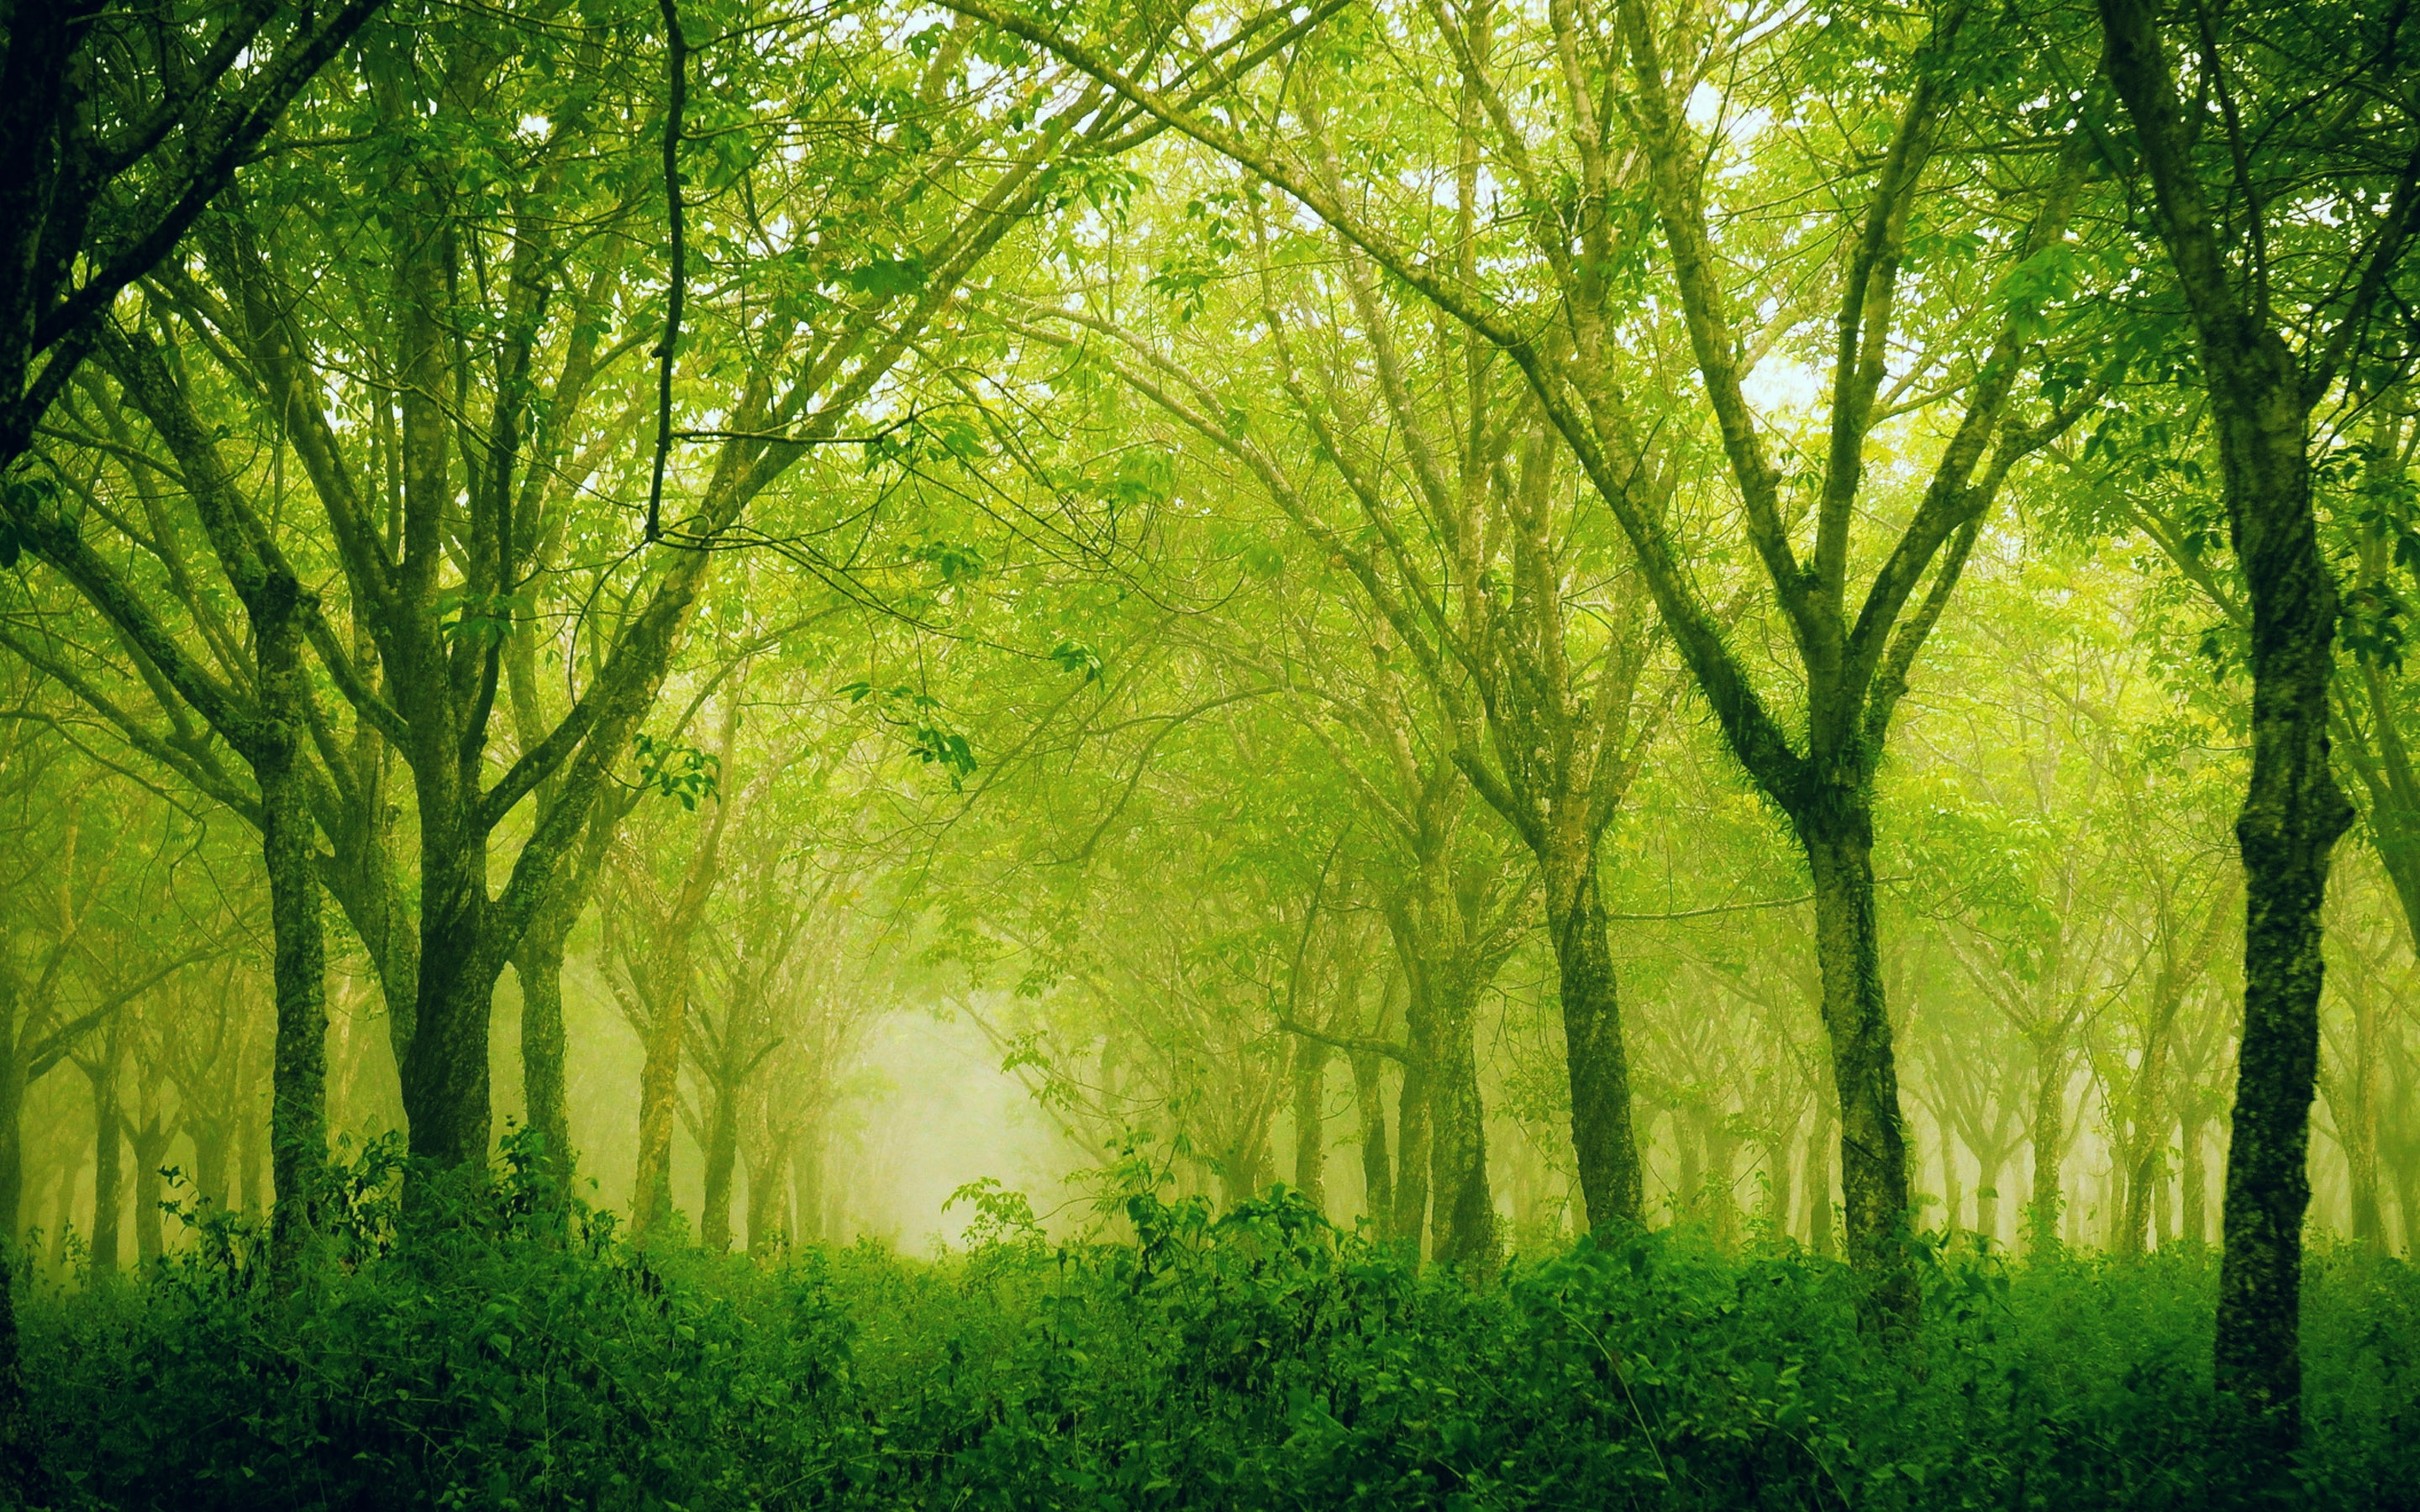 Hd Wallpaper Sublime Silence Forest For 2880 X 1800 Retina Display ...